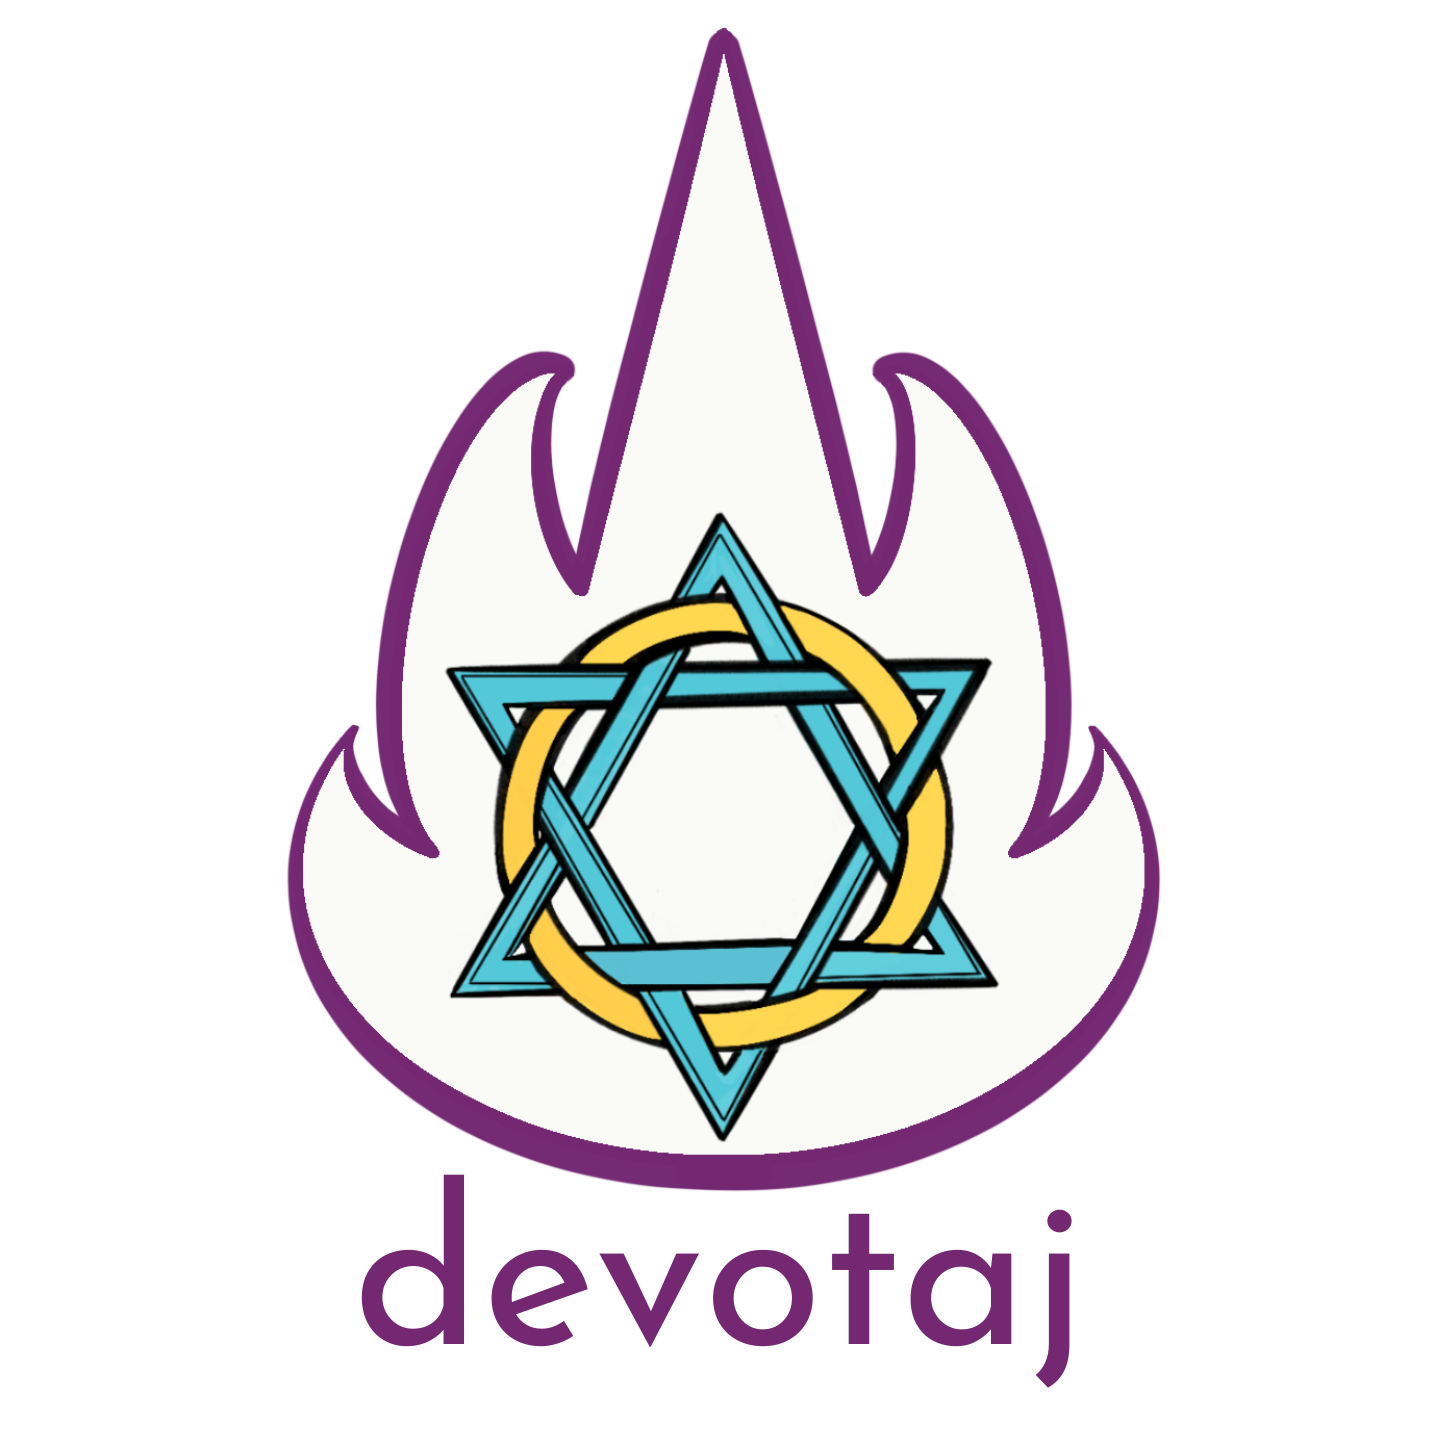 Devotaj Sacred Arts Logo: Star of David with intertwined circle surrounded by a flame